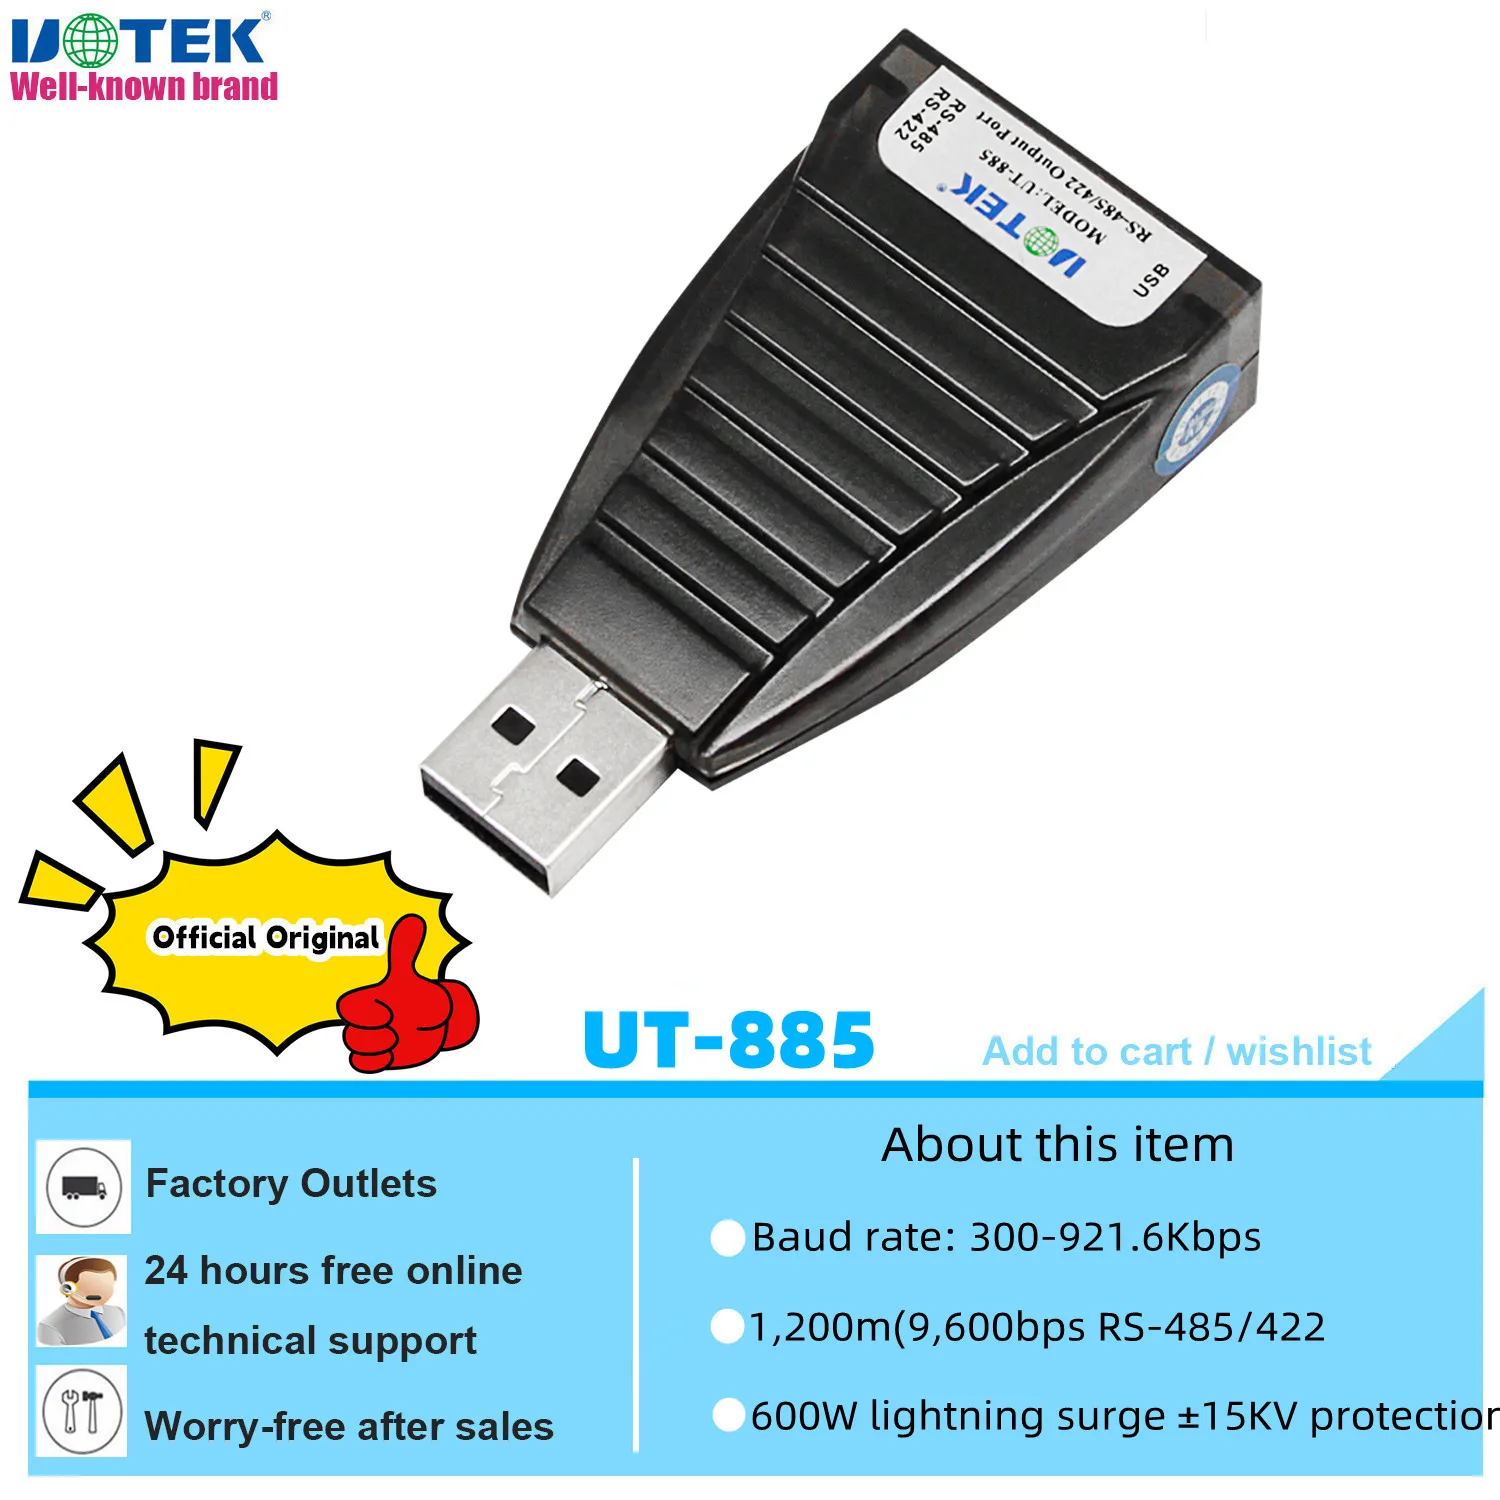 

UOTEK USB to RS-485 RS-422 Converter RS 485 422 USB-A RS485 RS422 Serial Adapter Connector Full Half Duplex Anti Surge UT-885